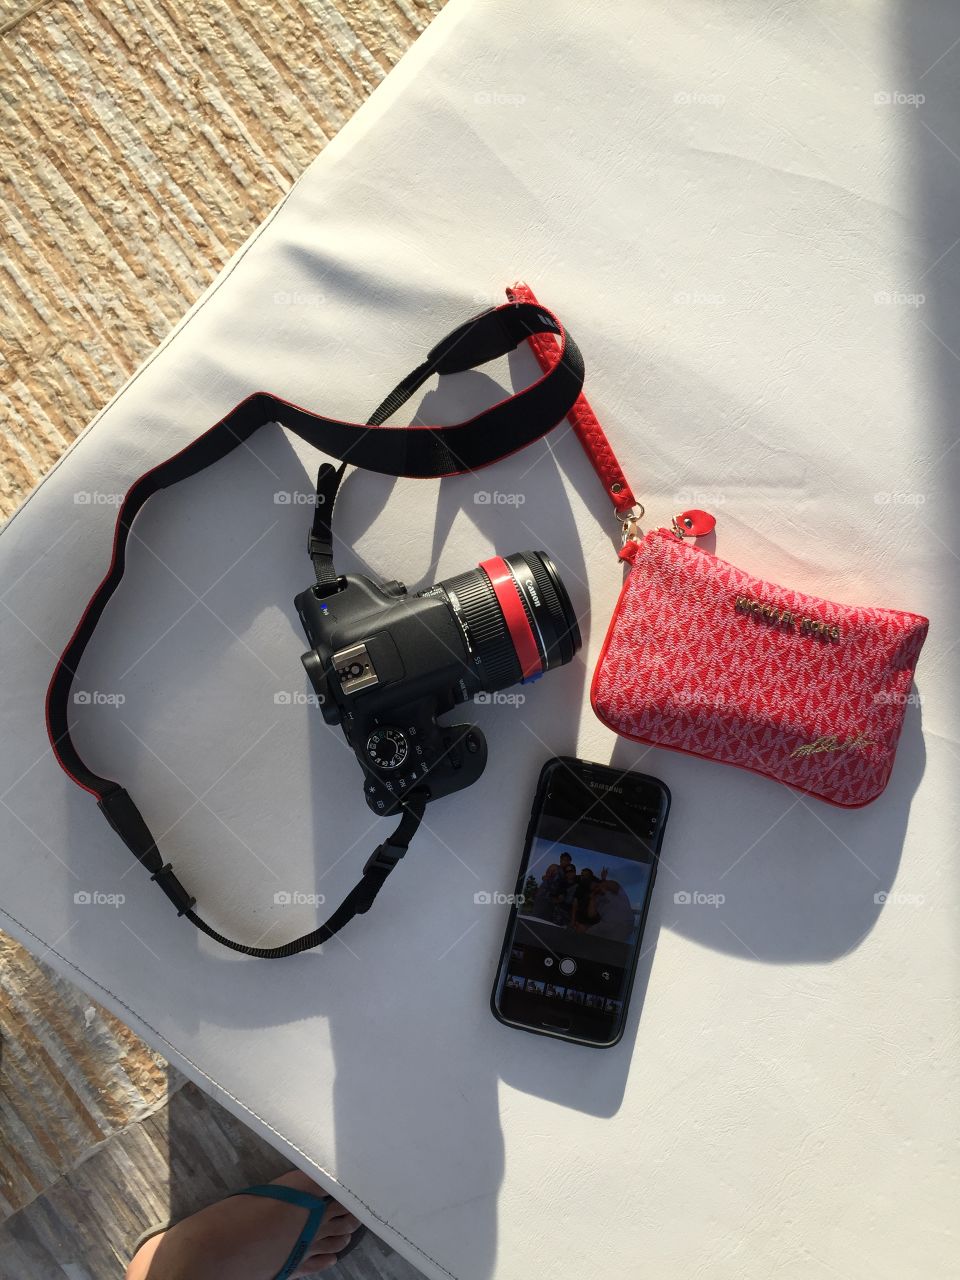 Basic needs for travelling: quality camera, a handy phone and a wallet full of cash!